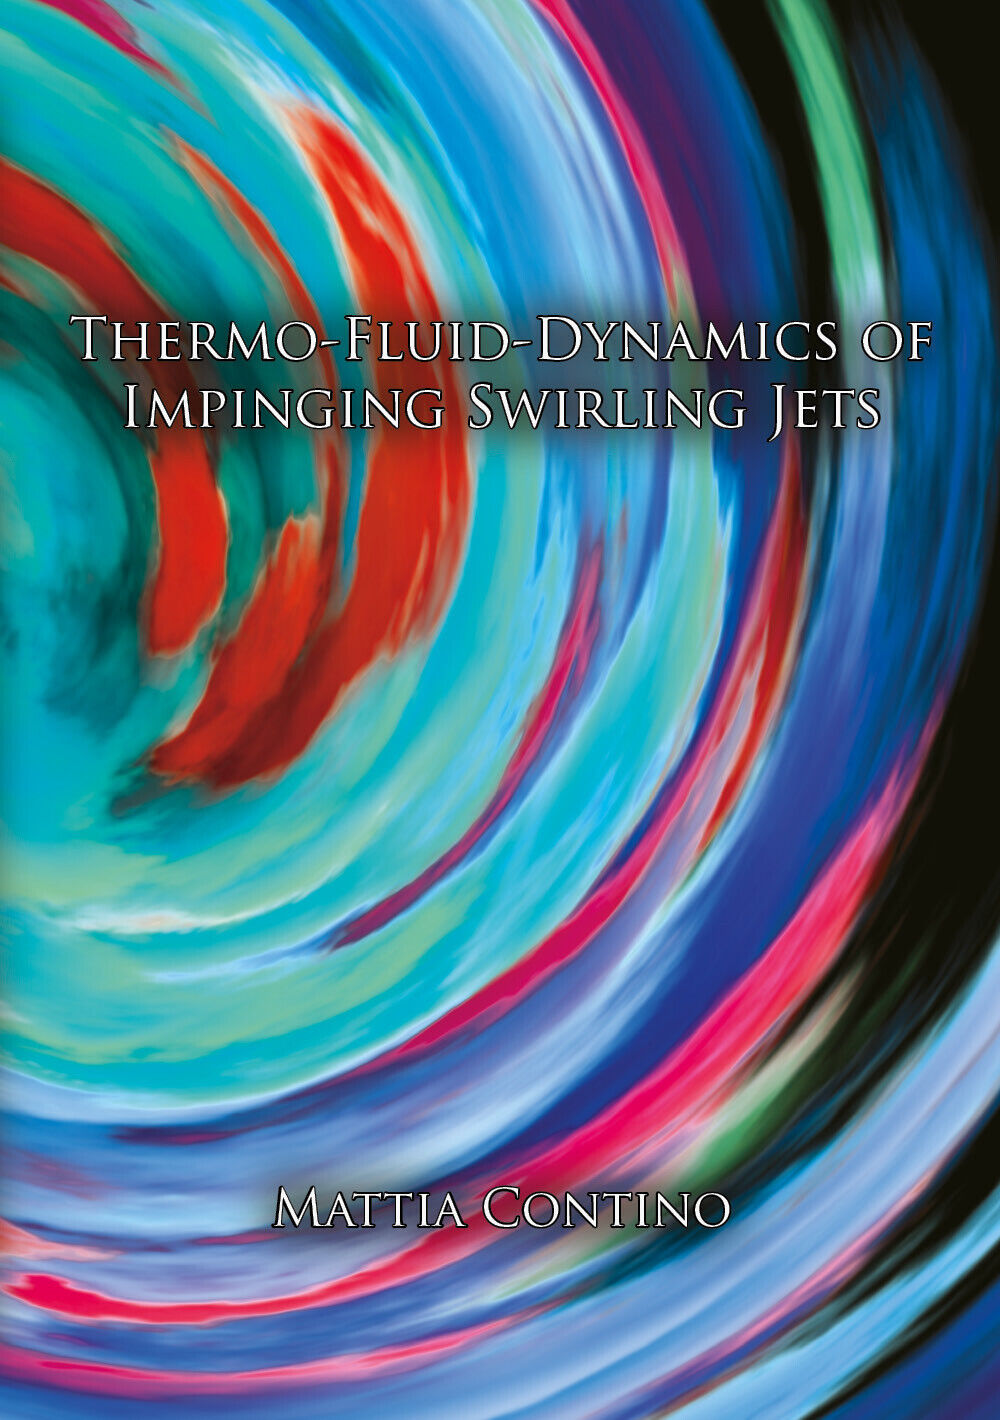 Thermo-fluid-dynamics of Impinging Swirling Jets - Mattia Contino,  2019 - P